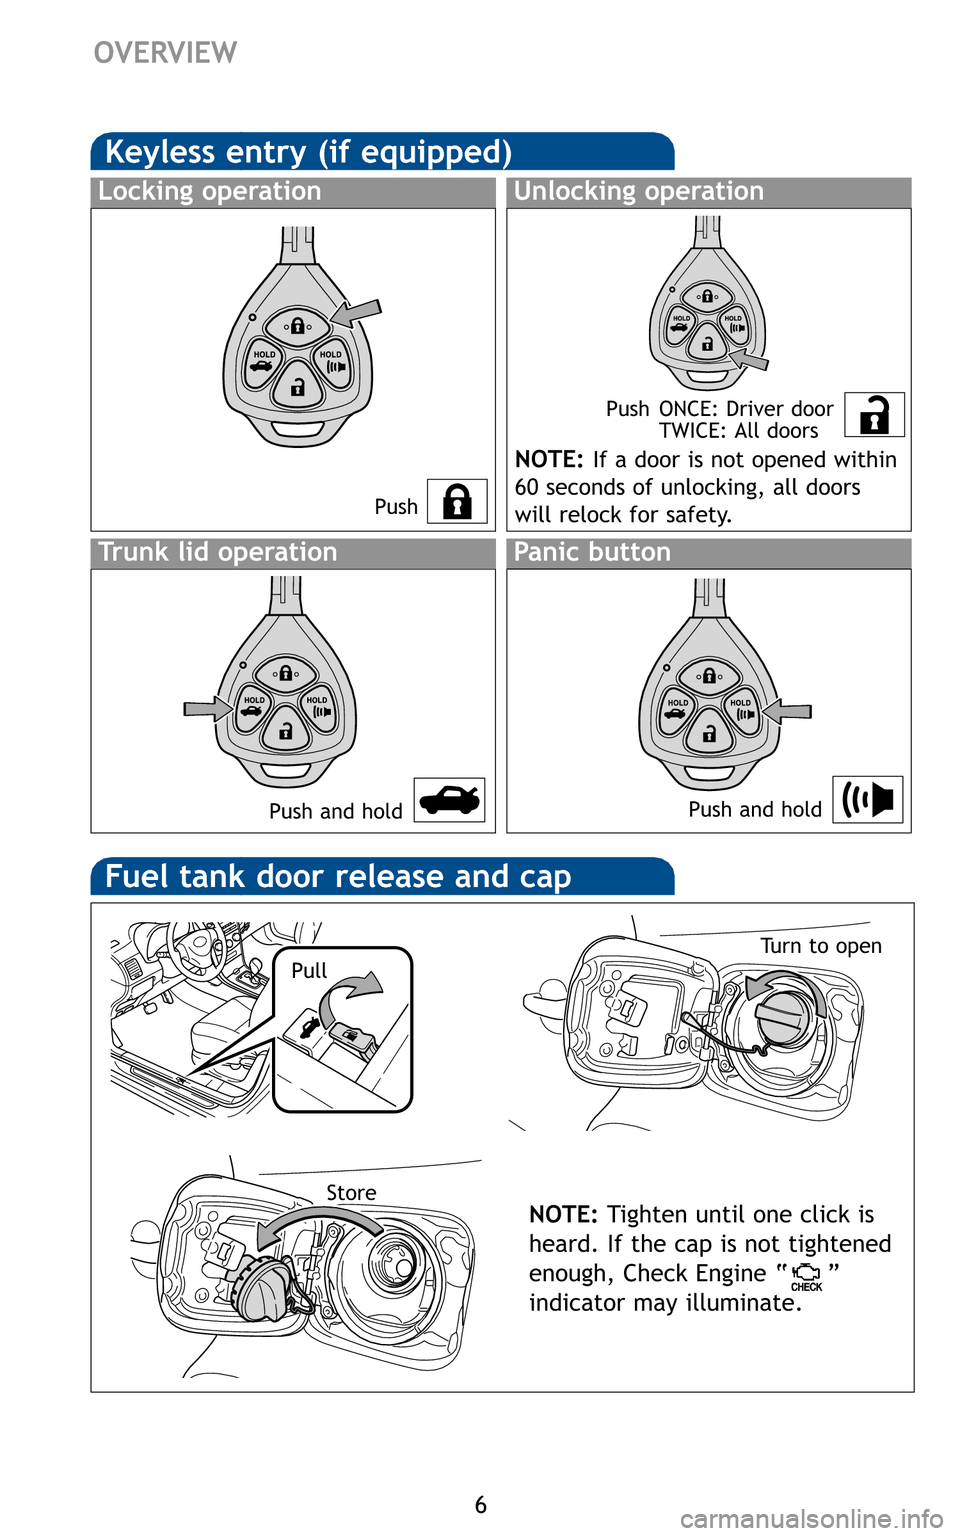 TOYOTA COROLLA 2011 10.G Quick Reference Guide 6
OVERVIEW

Push Push ONCE: Driver door 
TWICE: All doors


Push and hold
NOTE:If a door is not opened within 
60 seconds of unlocking, all doors 
will relock for safety.

Push and hold

NOTE: Tighten